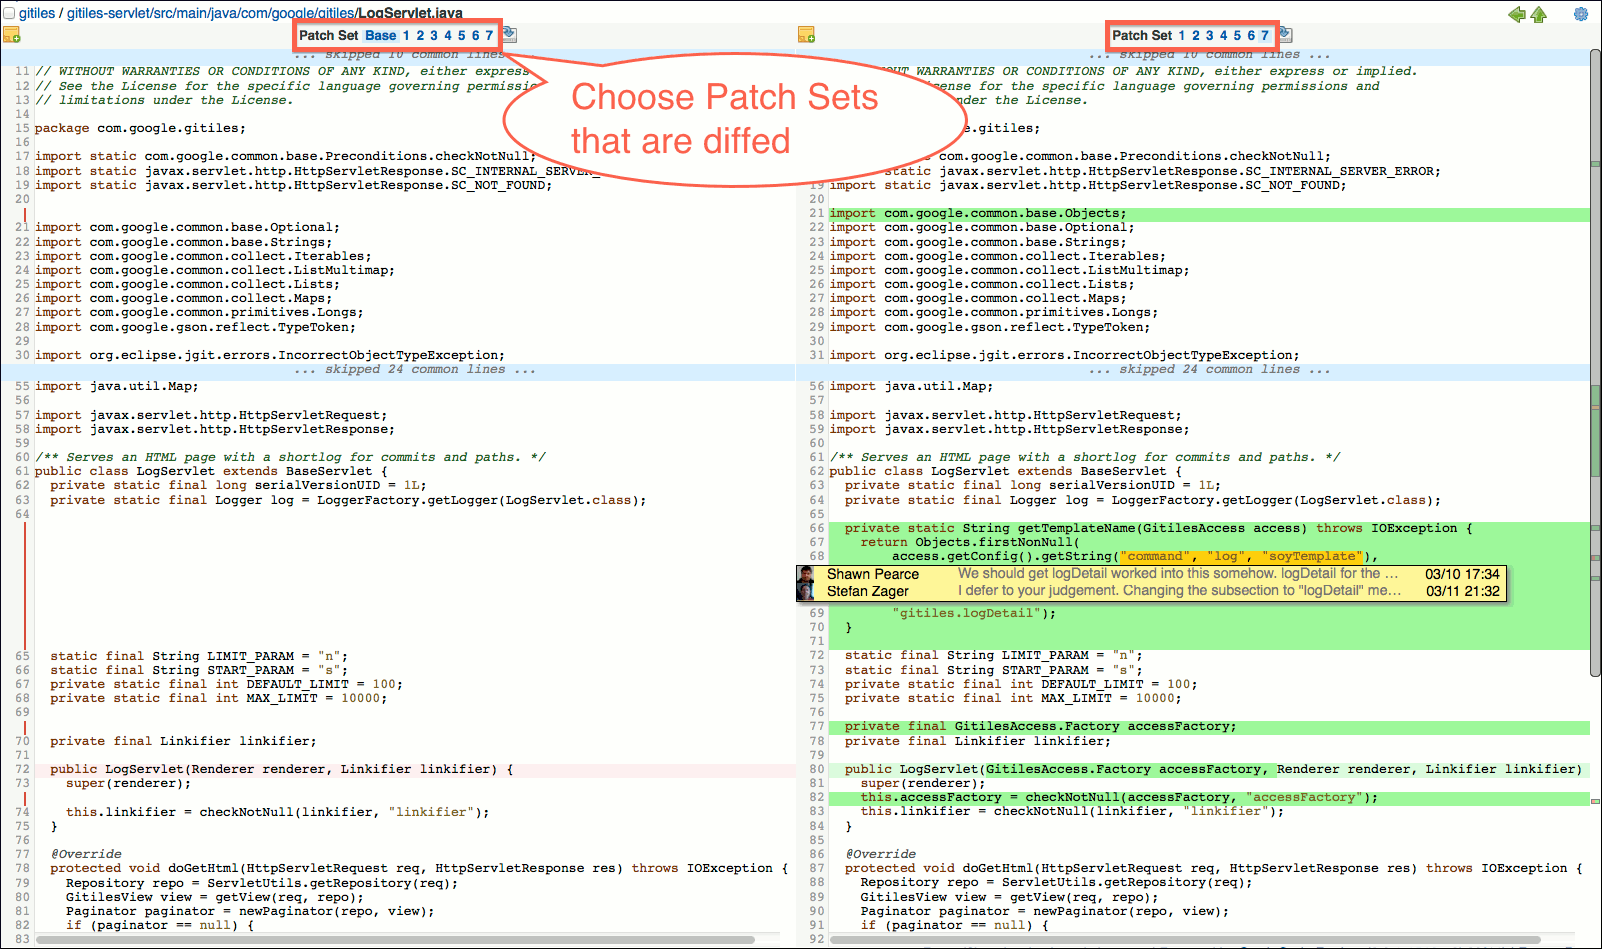 user review ui side by side diff screen patch sets